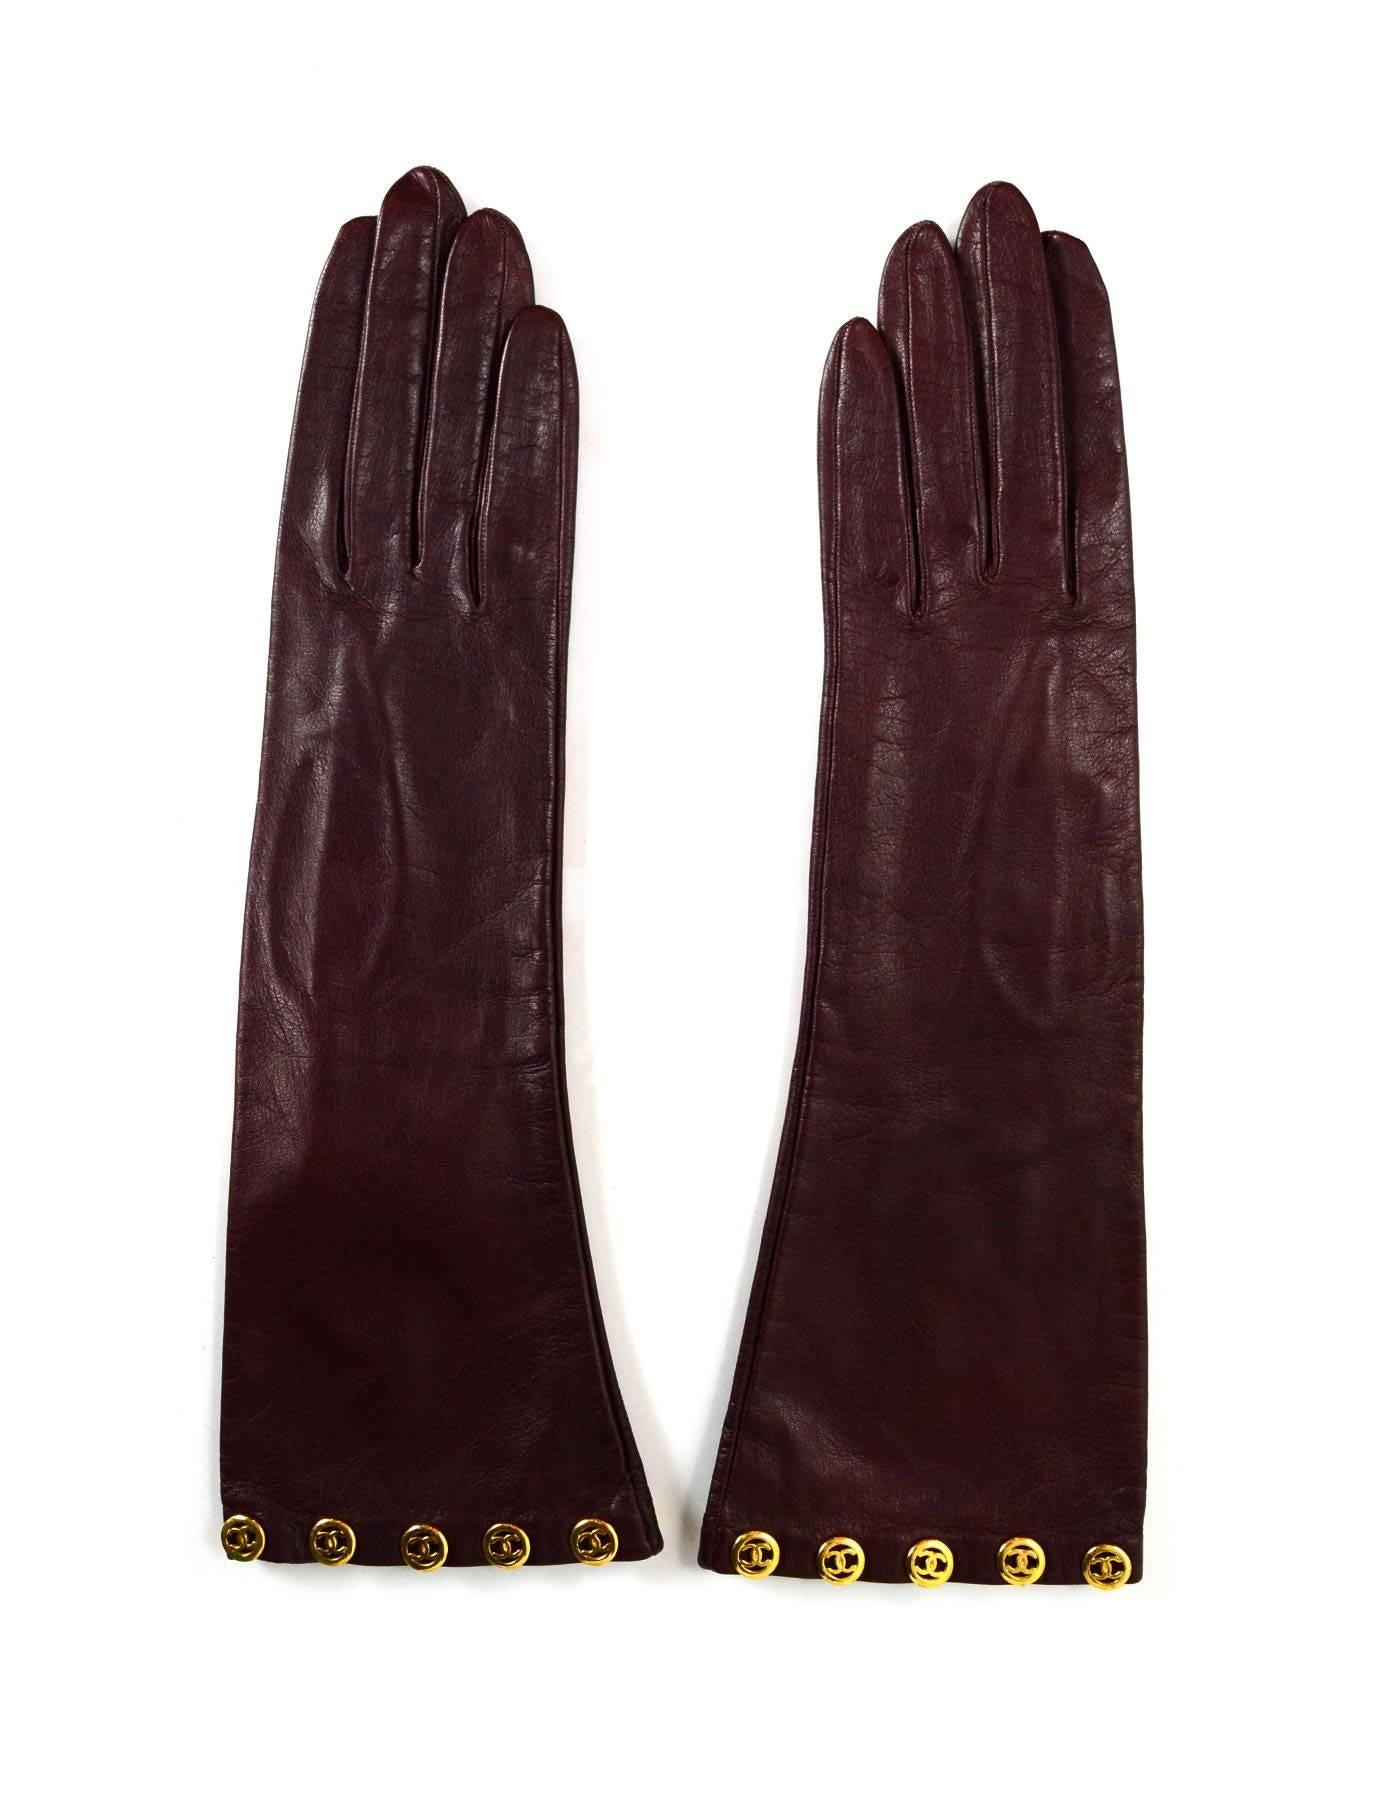 Chanel Burgundy Leather Long Gloves Sz 7.5
Features gold metal CC's at trim

Made In: France
Color: Burgundy, gold
Composition: Leather, metal
Overall Condition: Excellent pre-owned condition with the exception of light wear